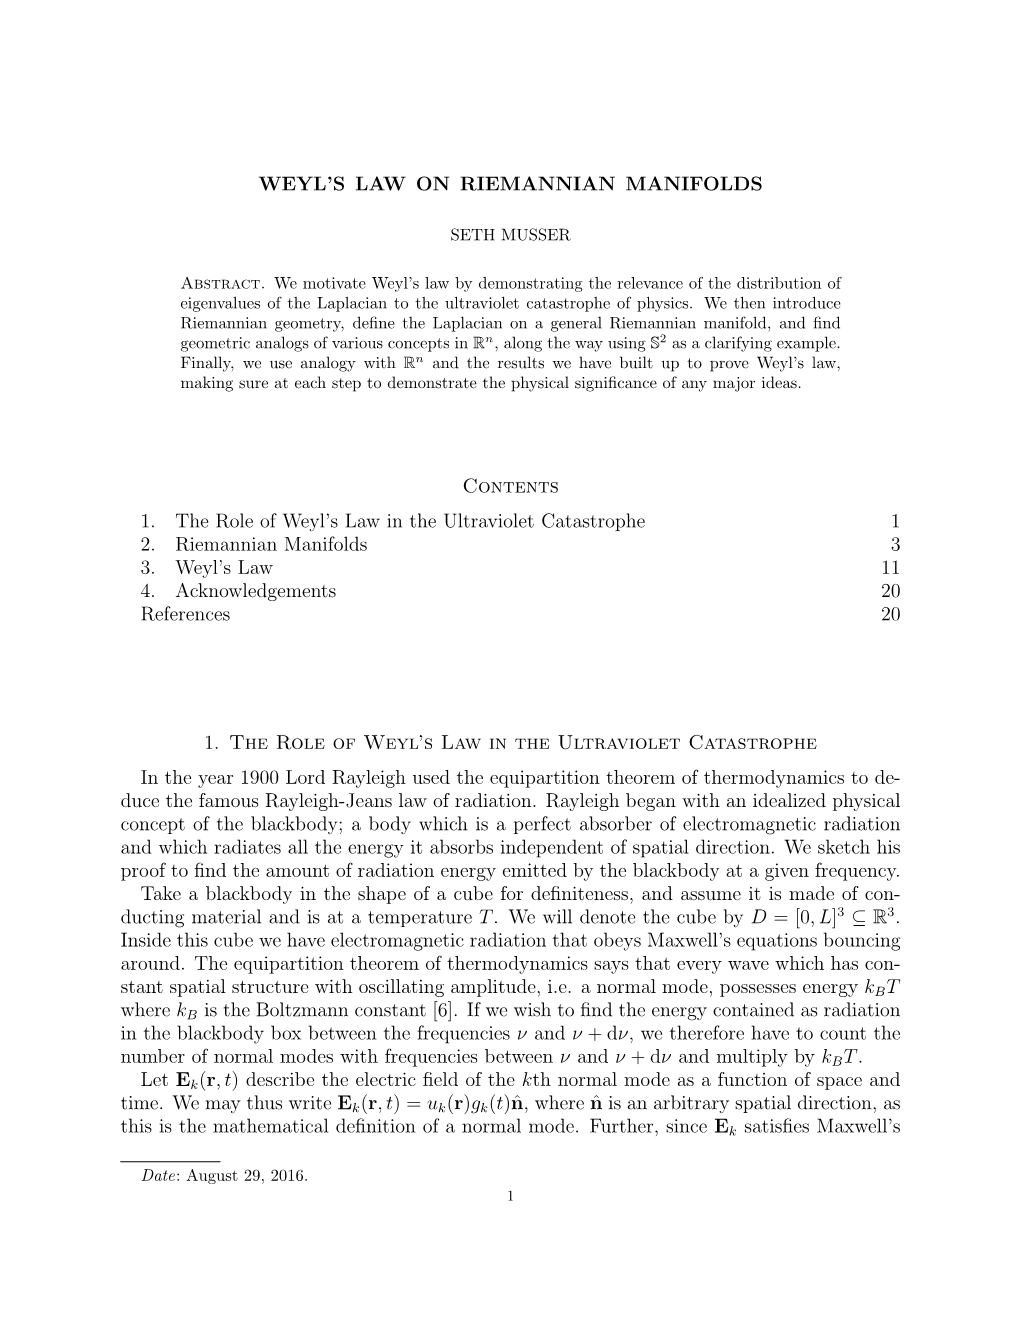 WEYL's LAW on RIEMANNIAN MANIFOLDS Contents 1. the Role of Weyl's Law in the Ultraviolet Catastrophe 1 2. Riemannian Manifol